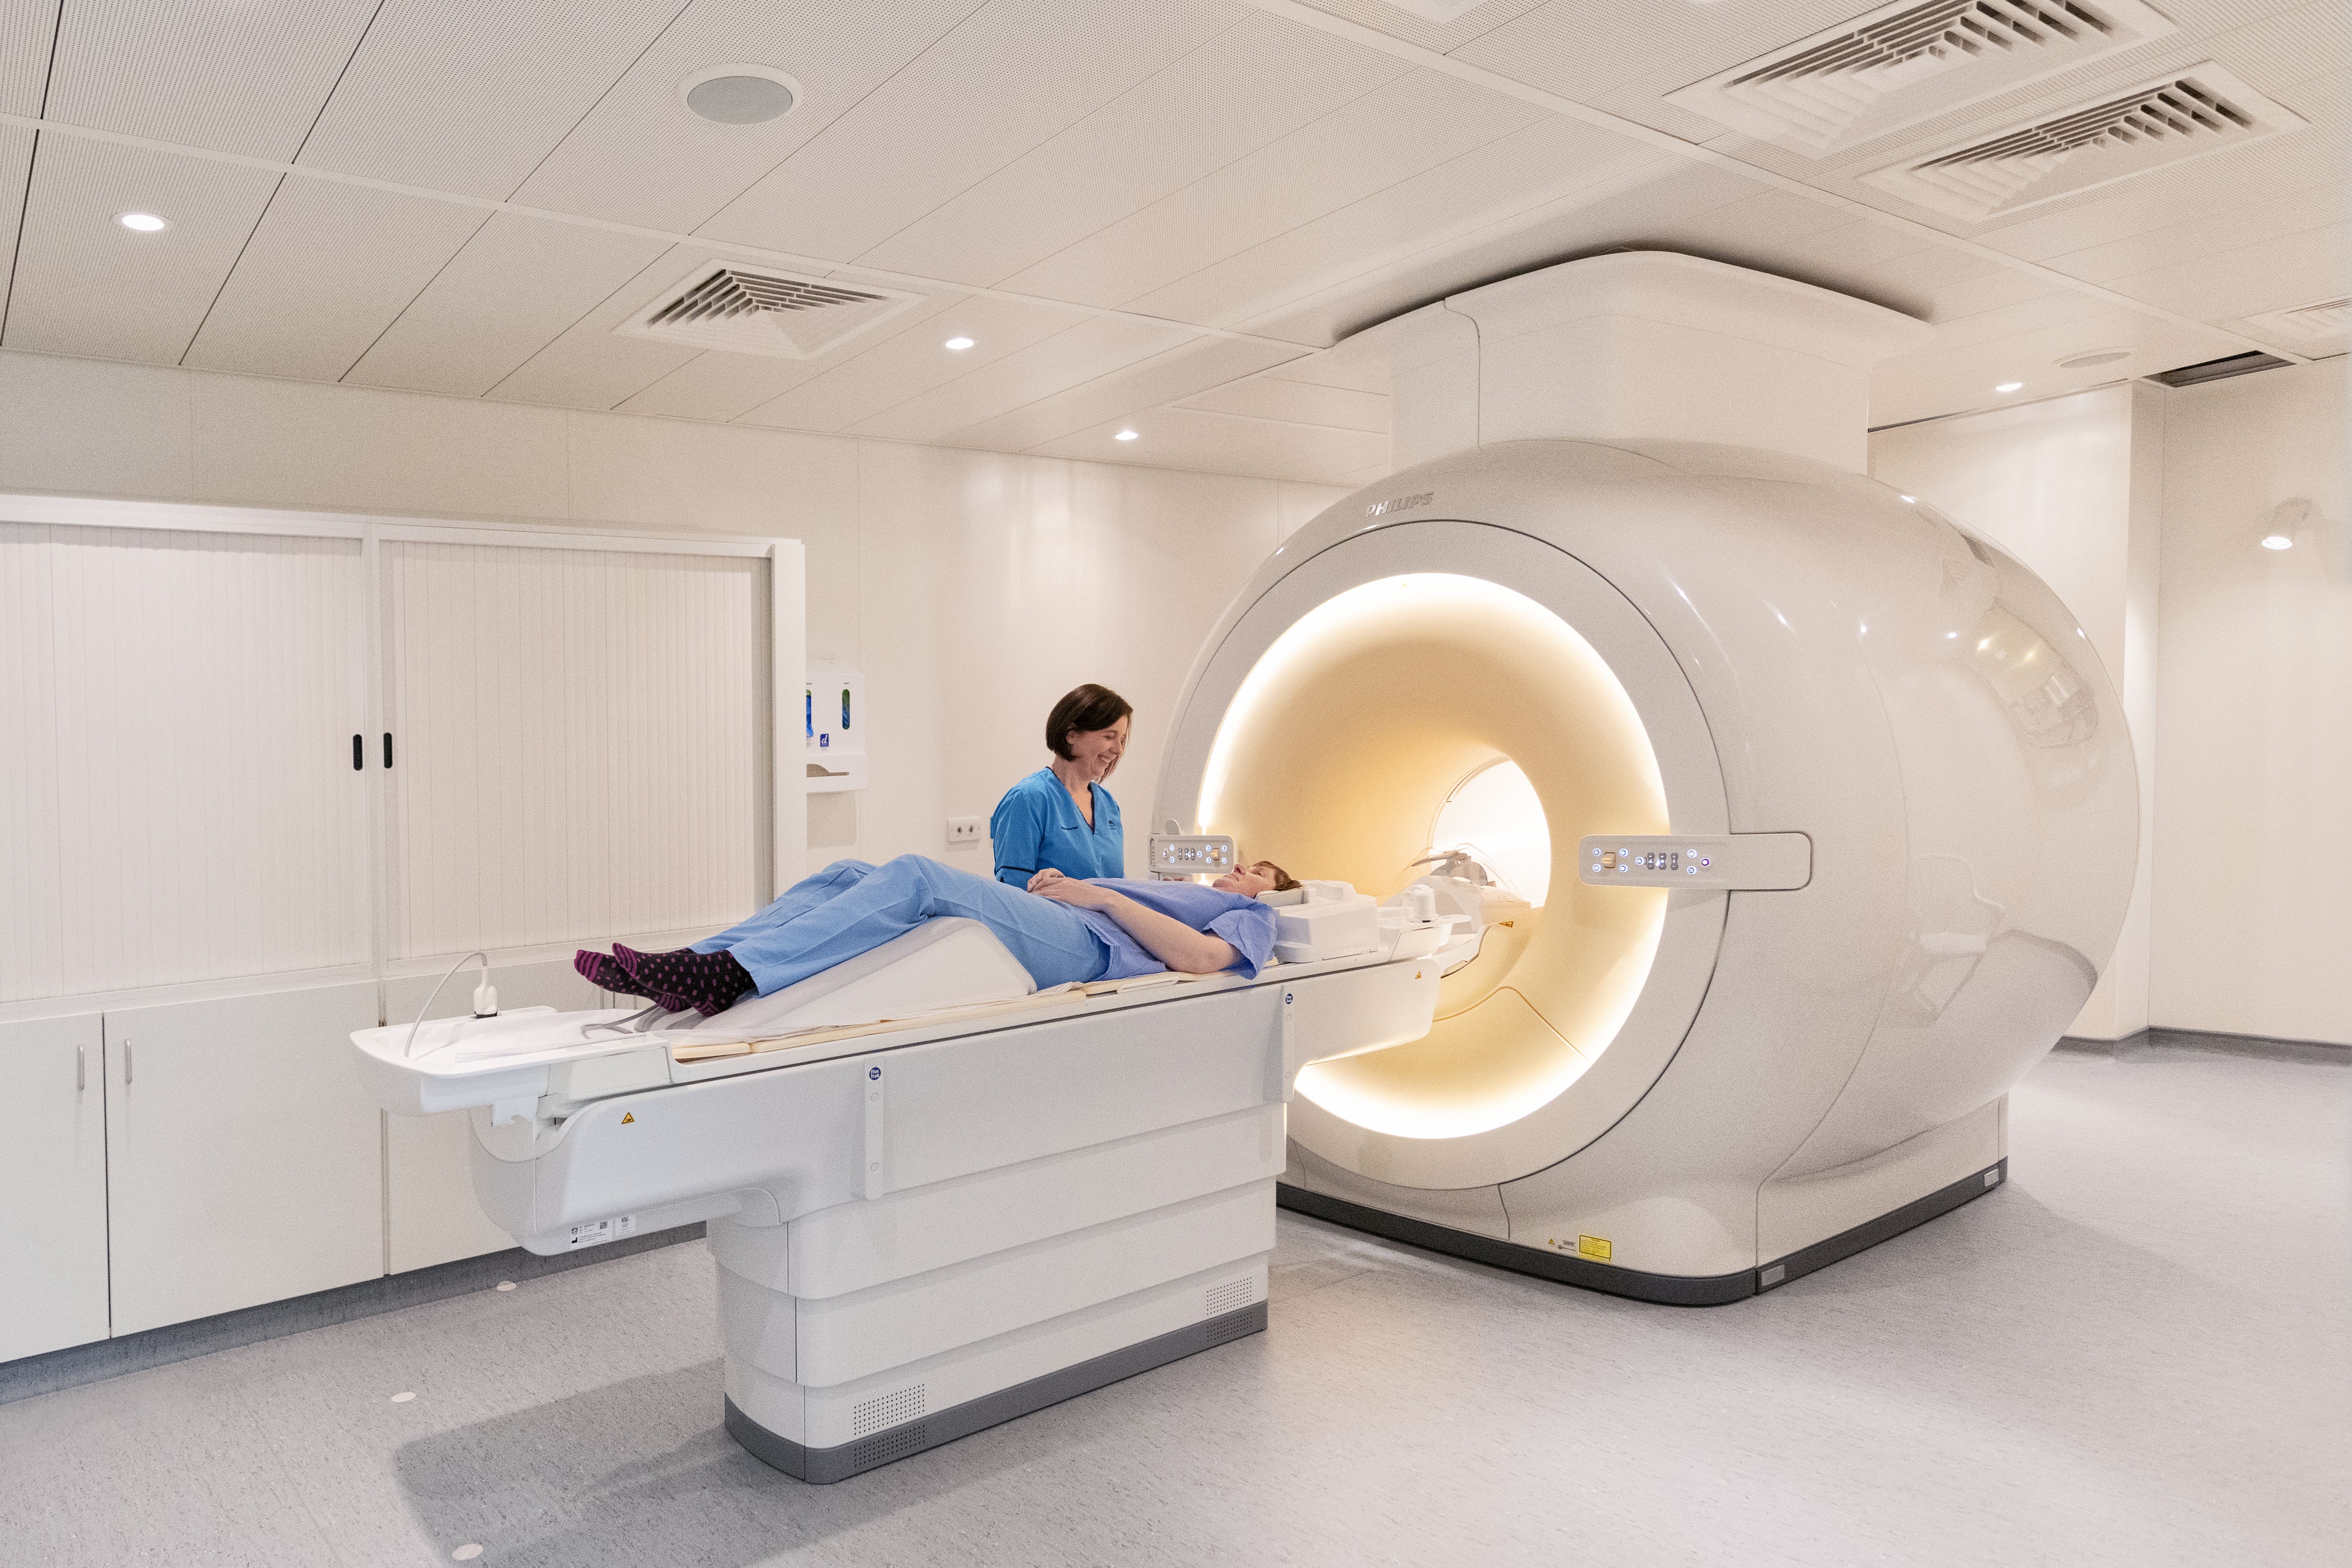 Each patient will undergo sensitive MRI testing to monitor the level of iron in their brain